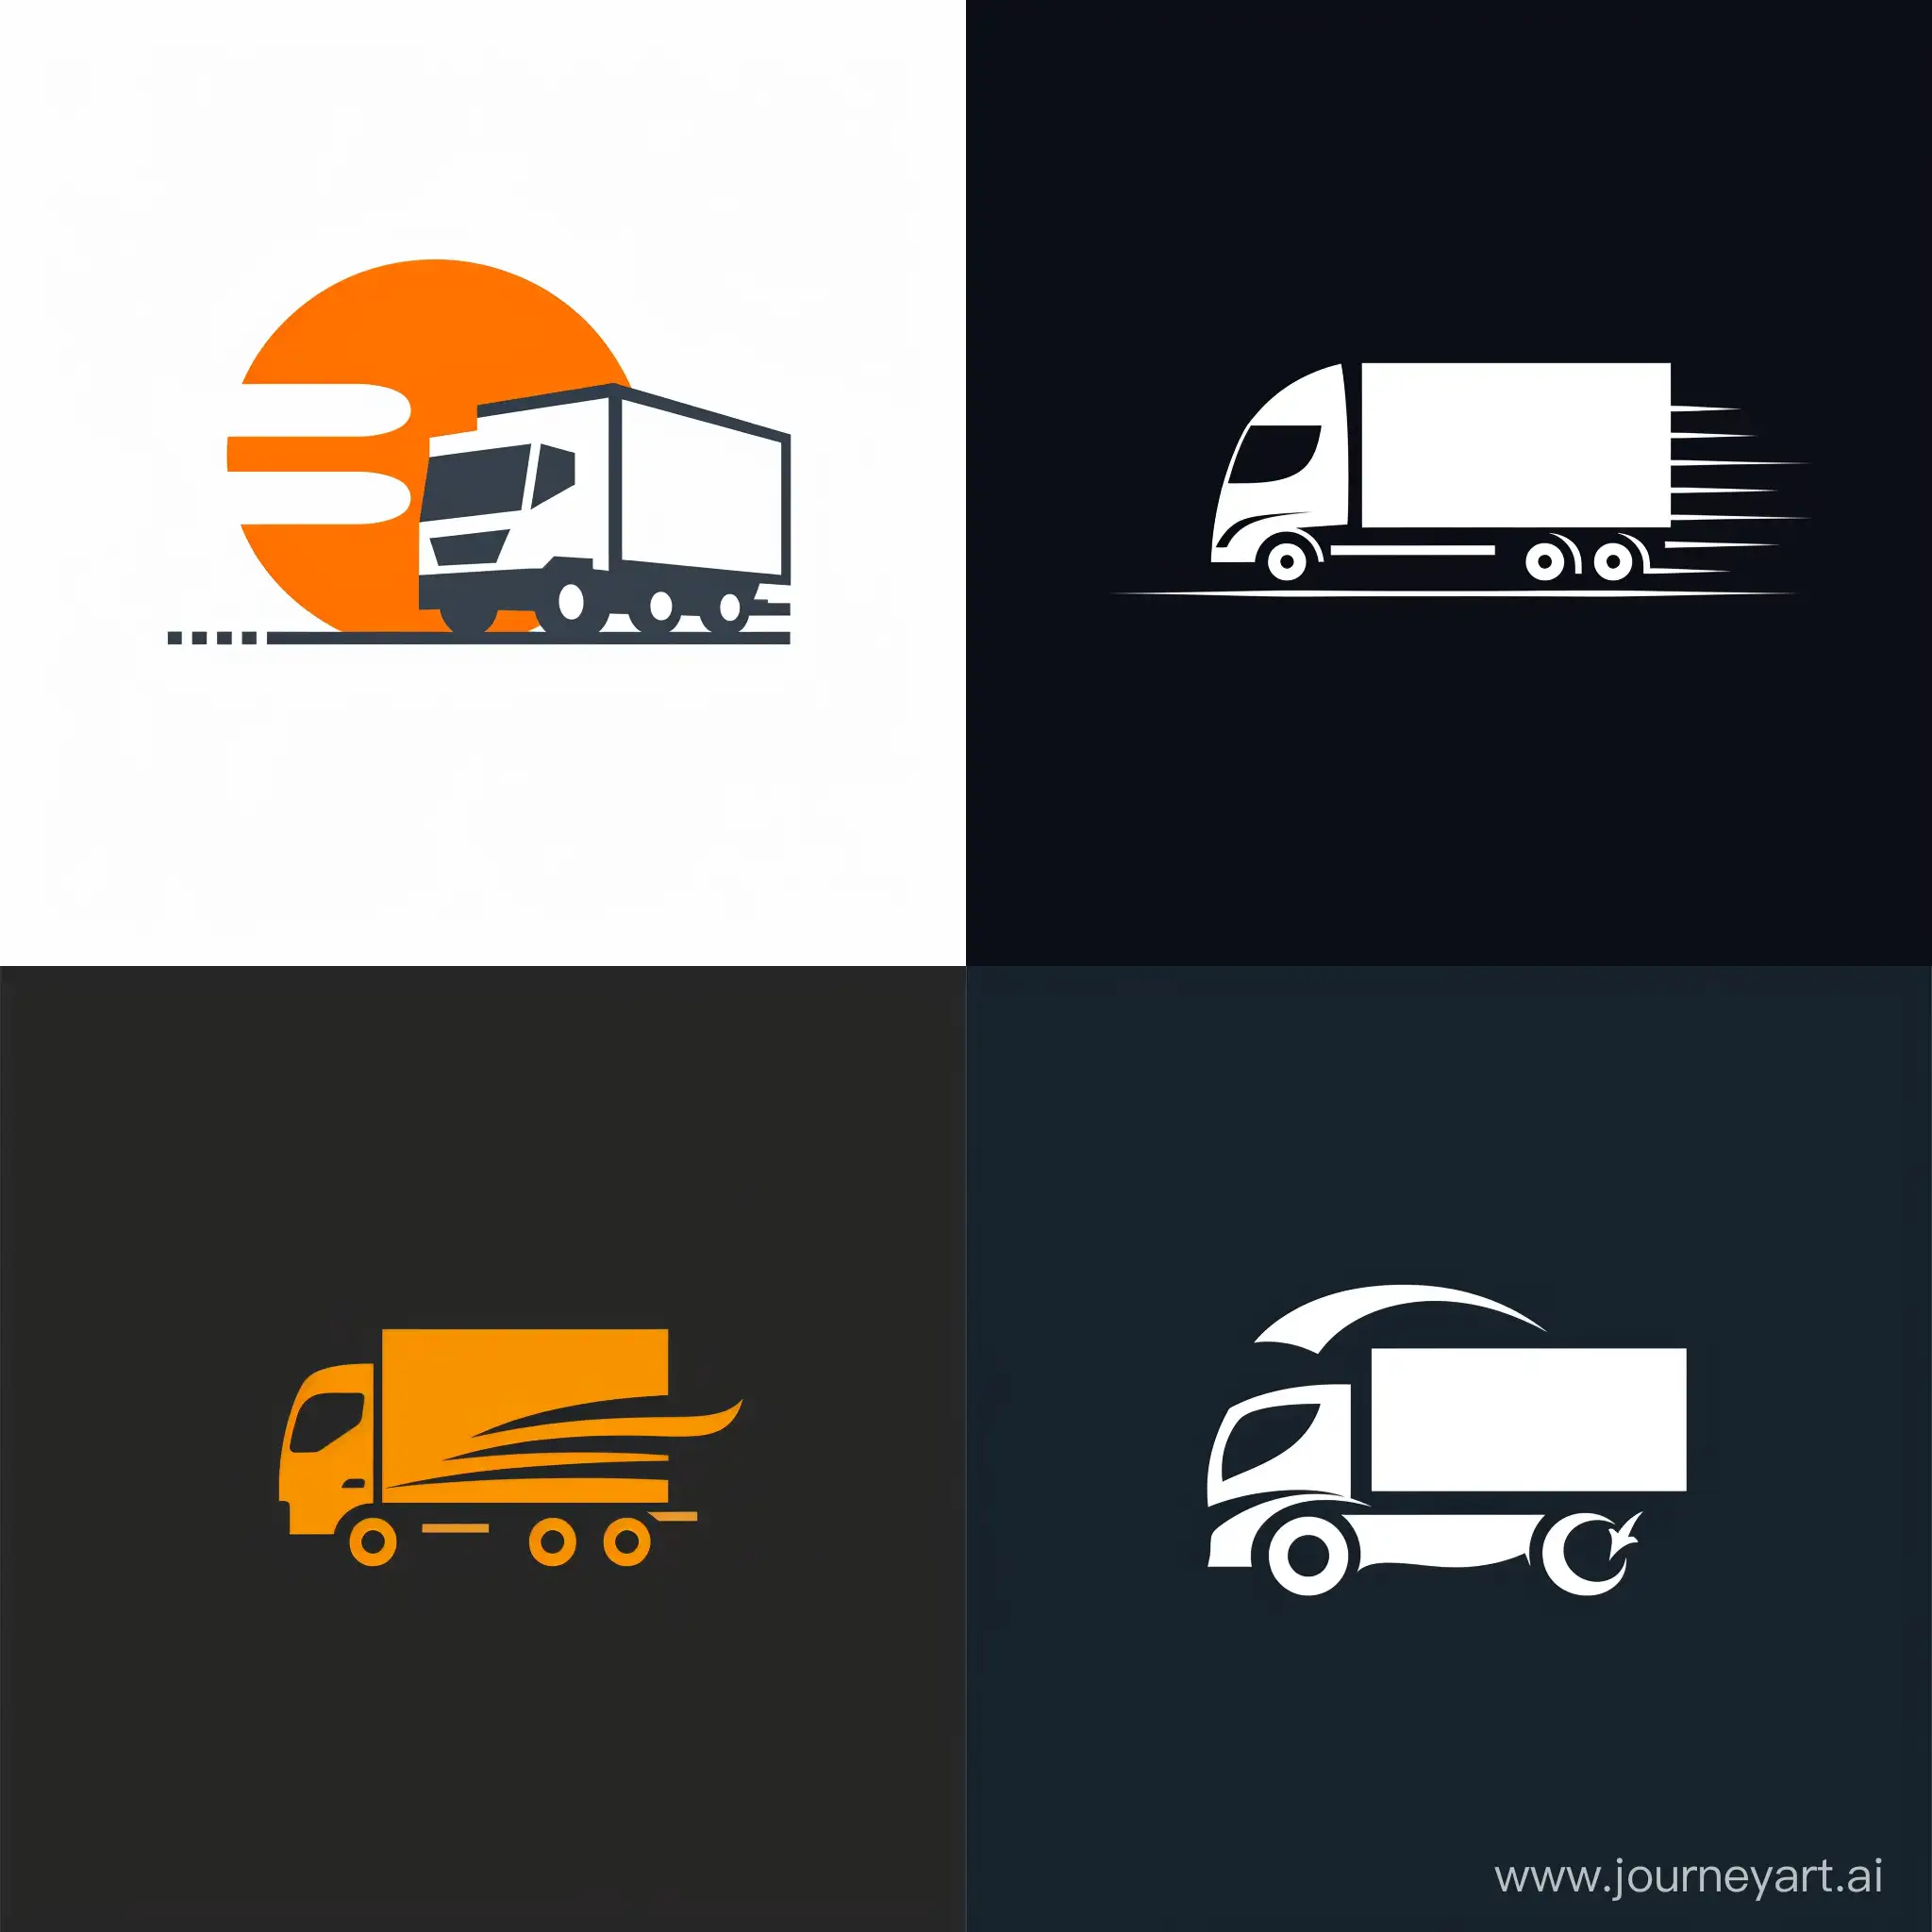 logo for the company. Sphere of activity: cargo transportation and services of movers, minimalism